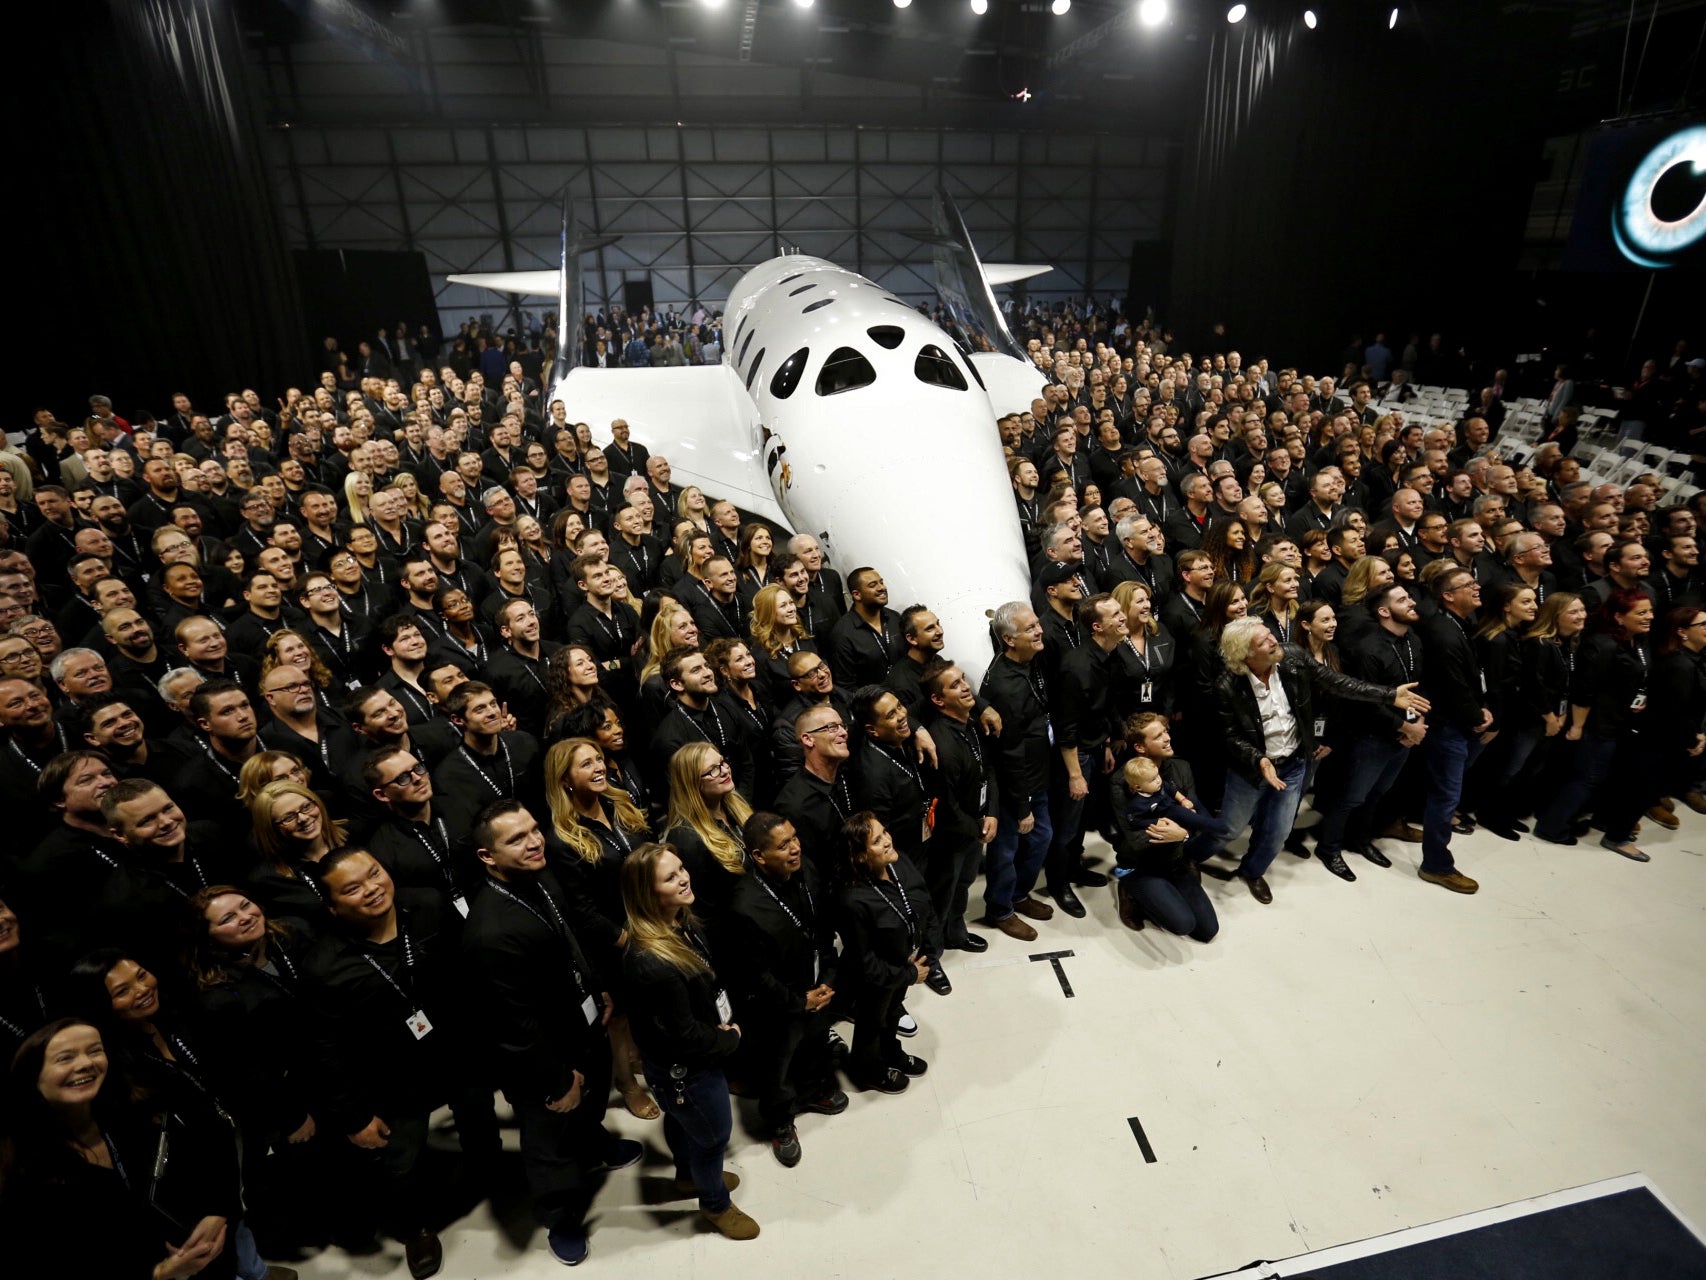 The Virgin Galactic SpaceShipTwo at its rollout in 2016, about a year and a half after Virgin’s last rocket plane broke into pieces (Getty)